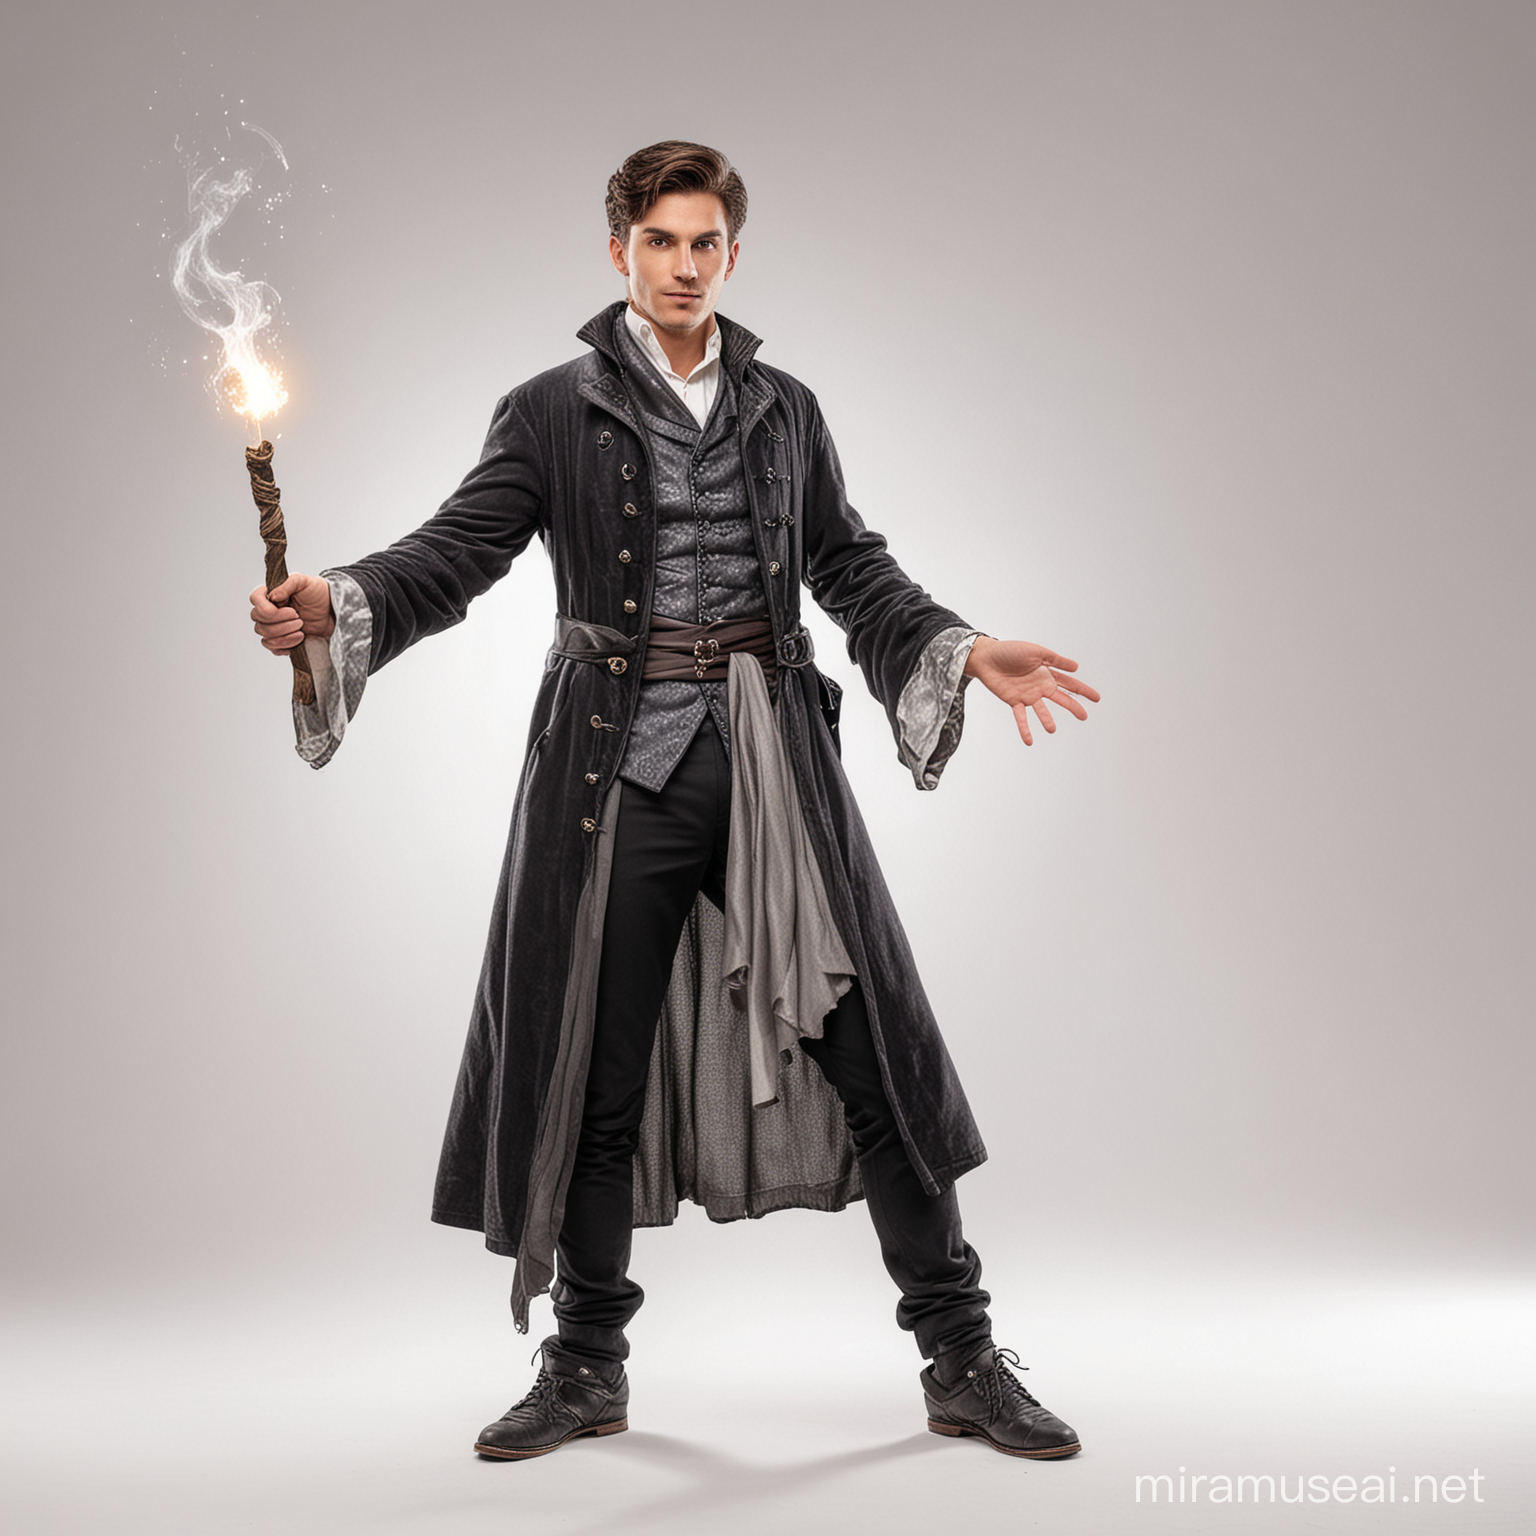 Male Wizard Performing Magic Spell with Wand on White Background